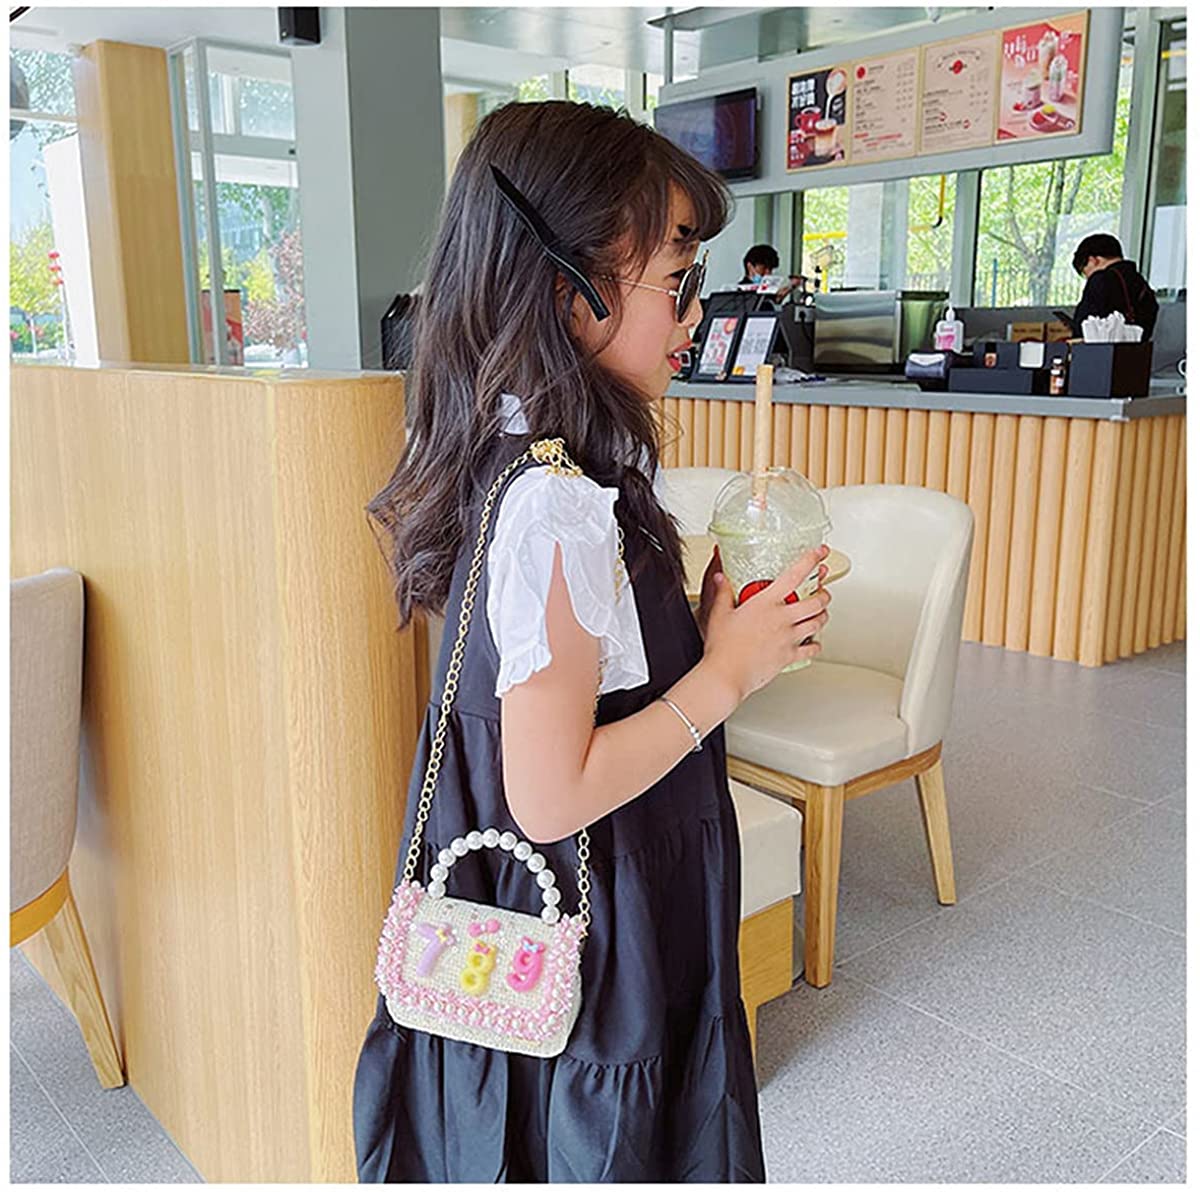 Glittery Toddler Crossbody Handbag With Chain Mini Shell Sequin Shoulder Bag  For Girls Available DW4192 From China1zhan, $7.42 | DHgate.Com